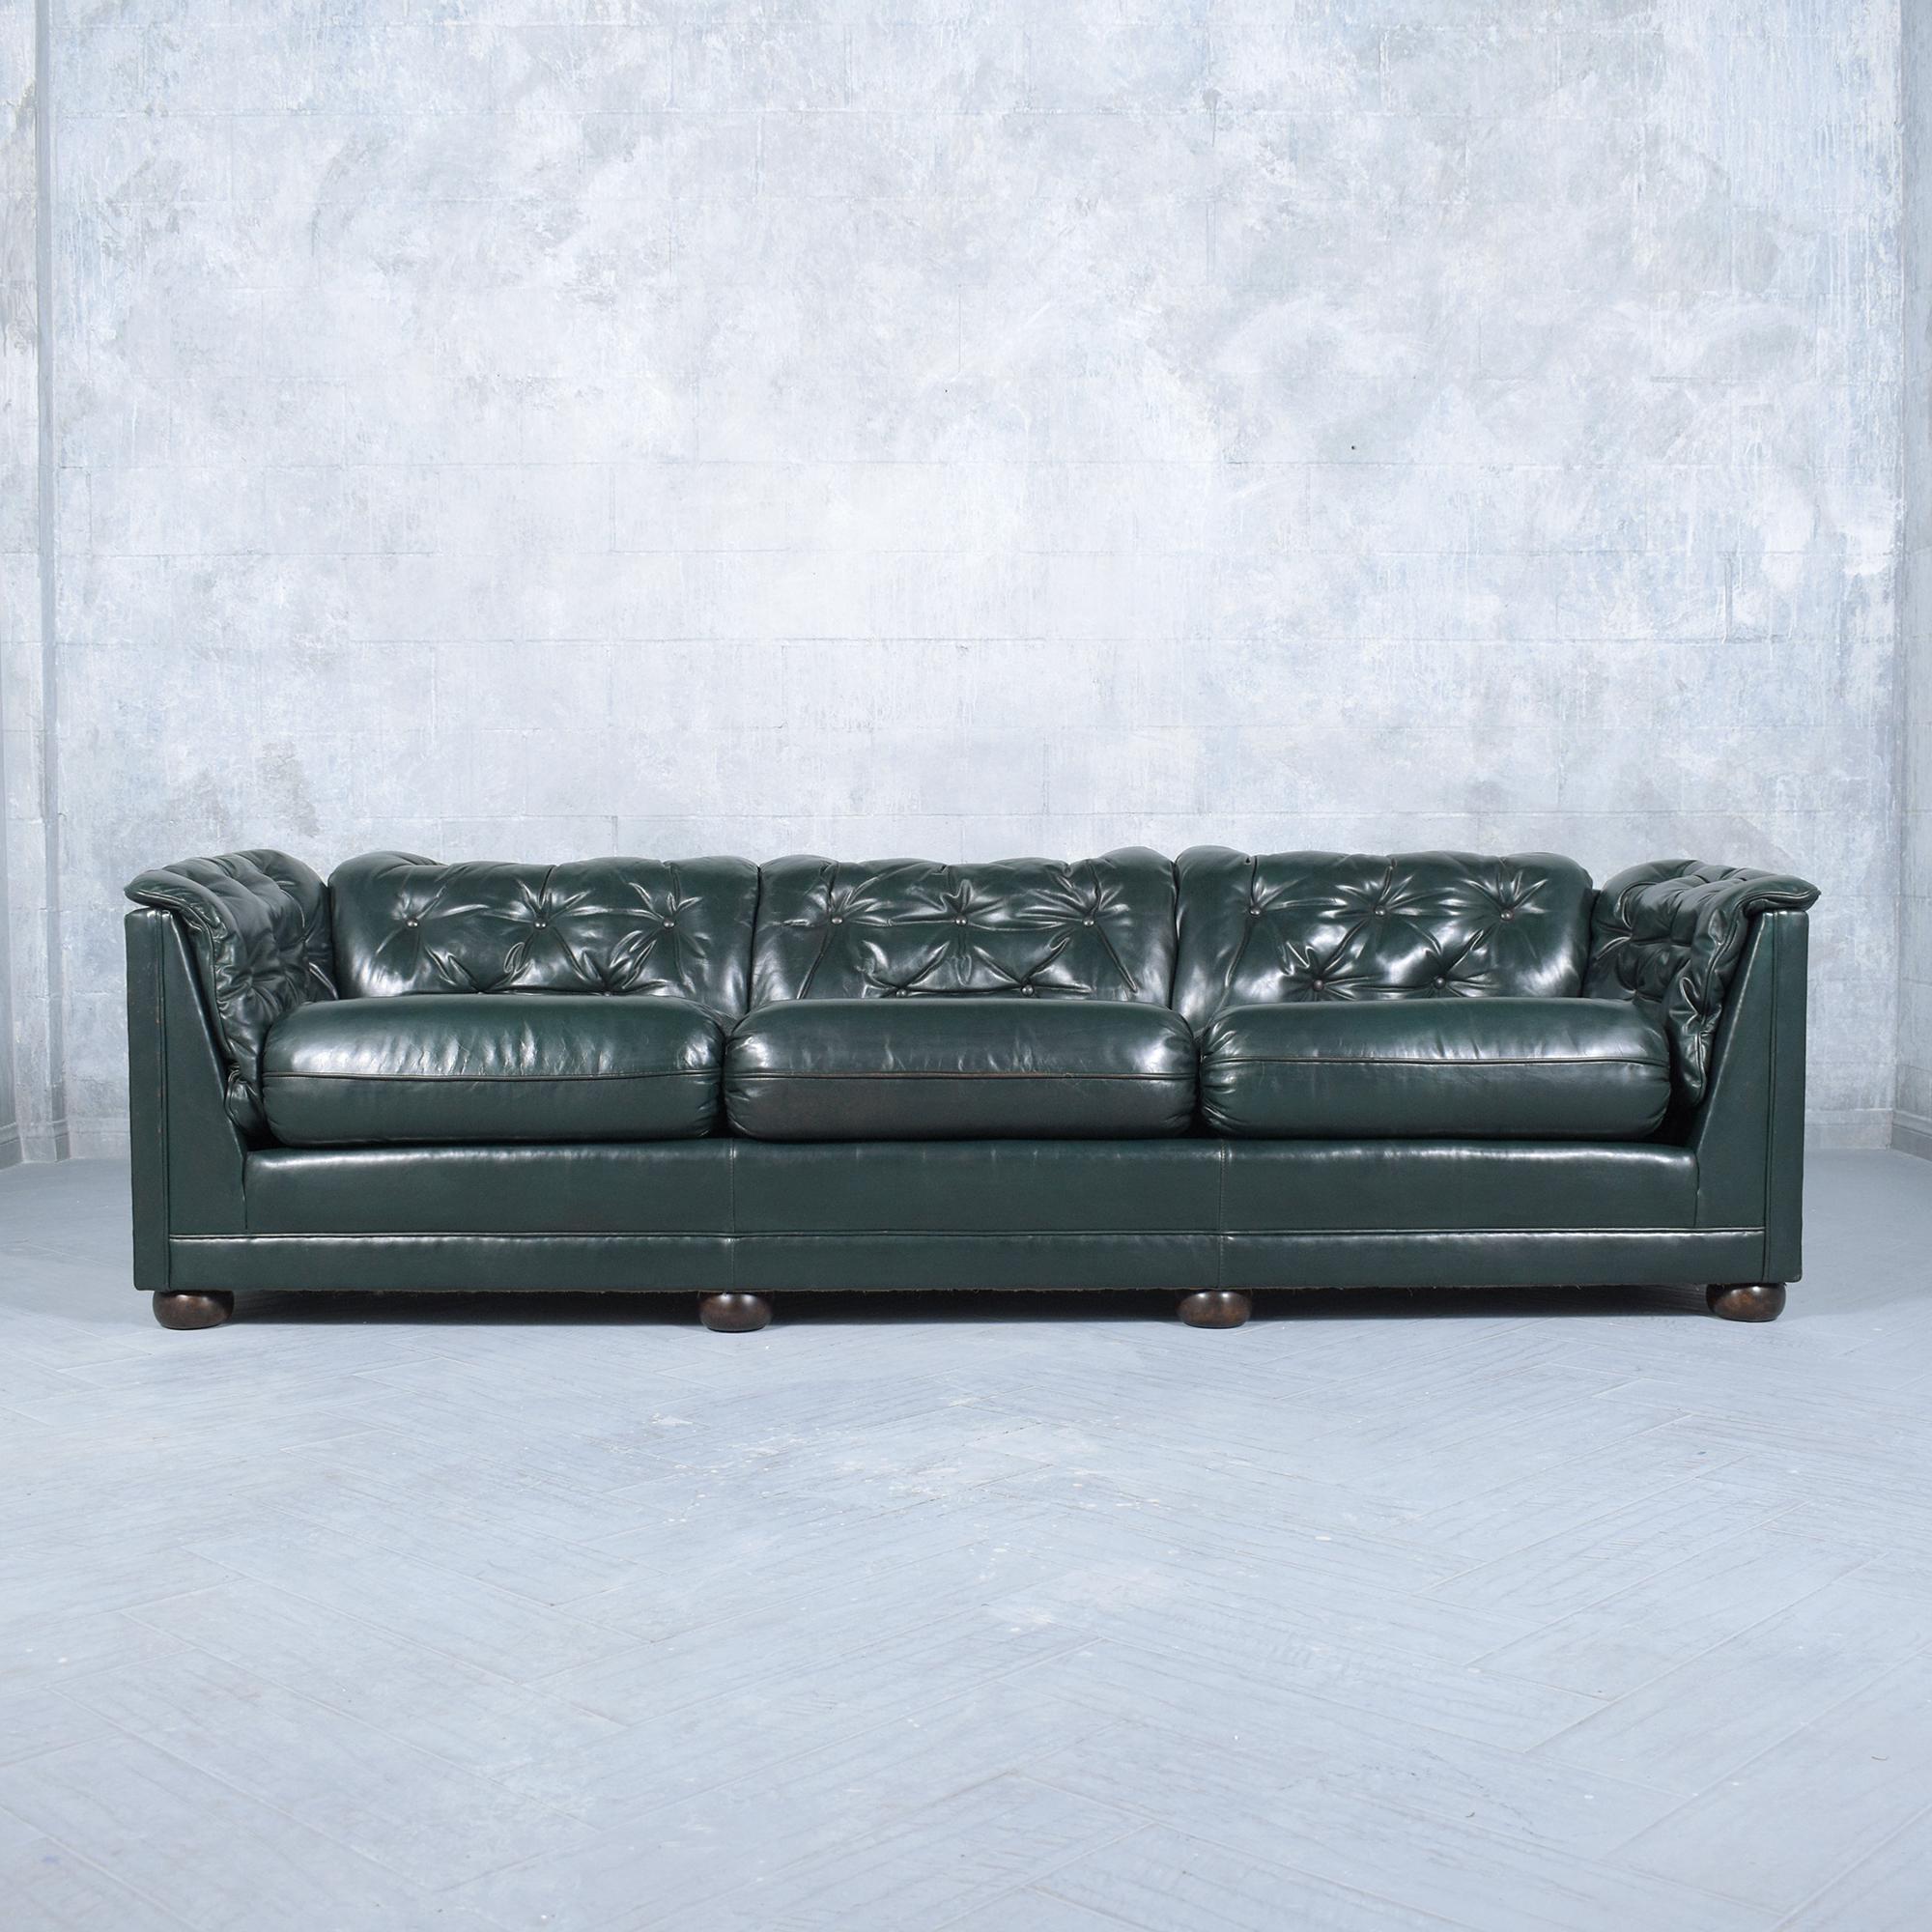 1960s Vintage Emerald Green Tufted Chesterfield Leather Sofa 1